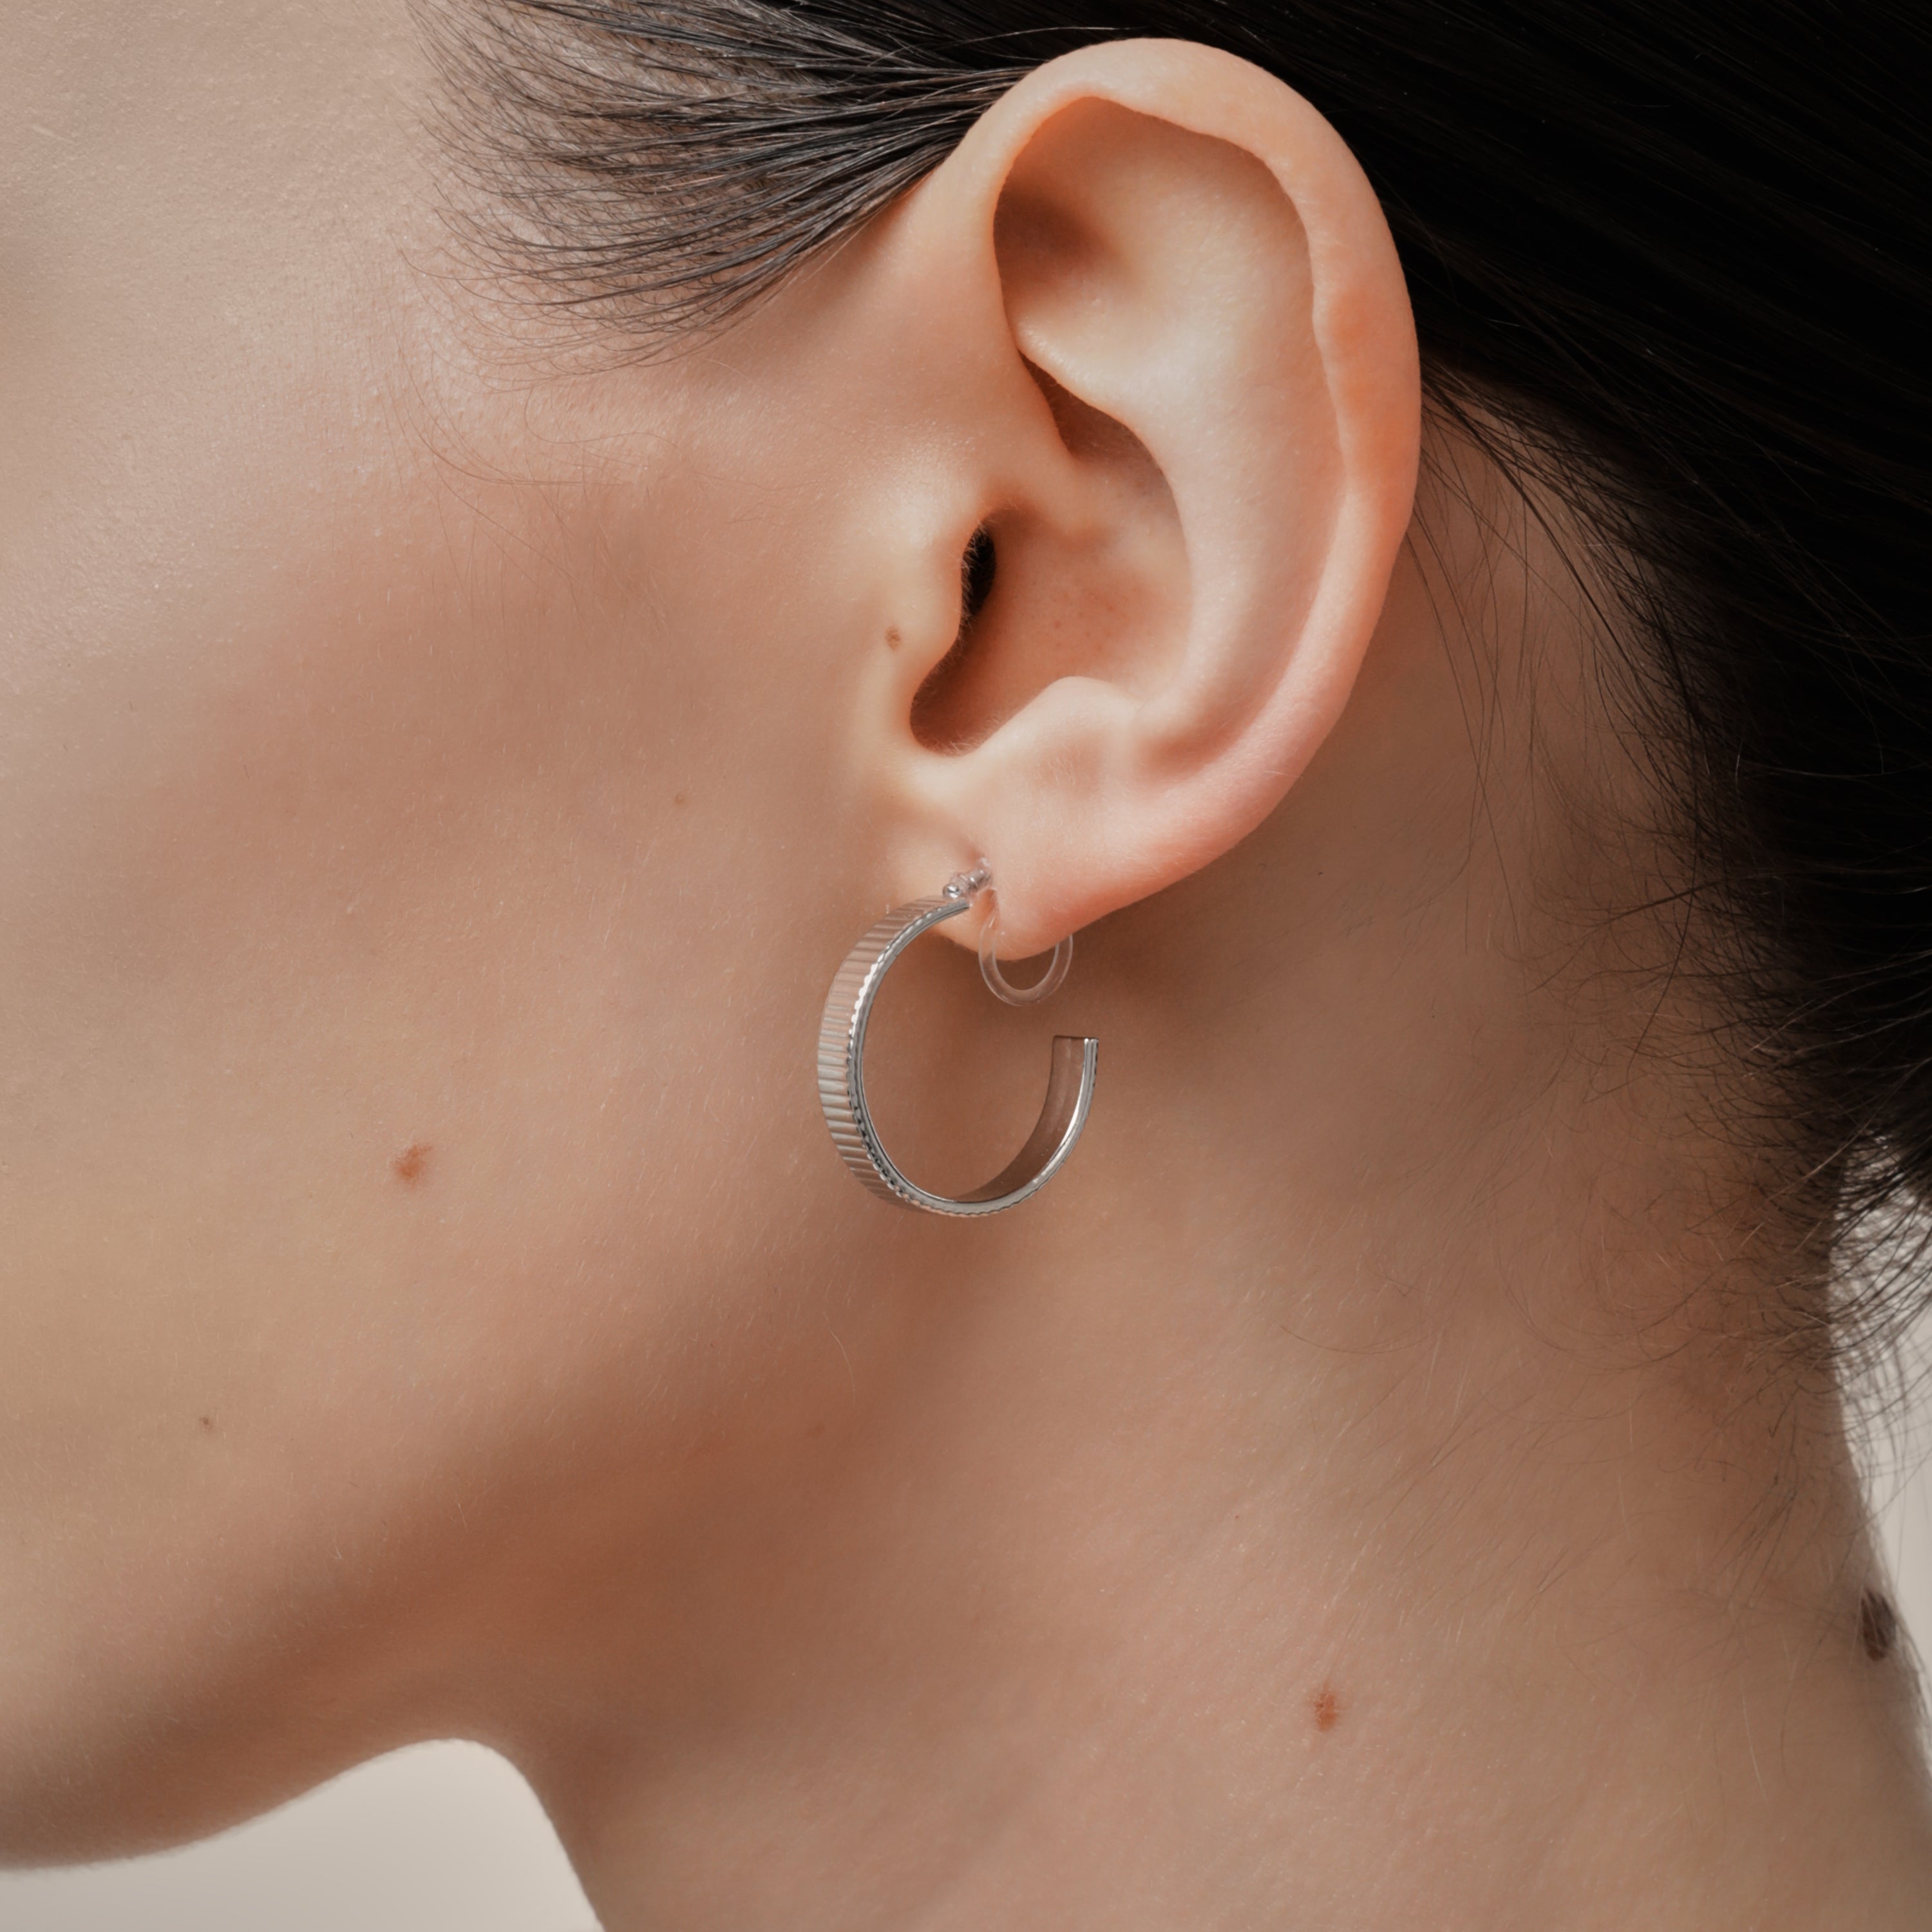 A model wearing the Pleated Hoop Clip On Earrings in Silver offer a resin clip-on closure for a secure and comfortable fit for a variety of ear sizes and sensitivities. With an average wear duration of 8-12 hours, these earrings are perfect for all-day wear. Please note that this listing is for a single pair